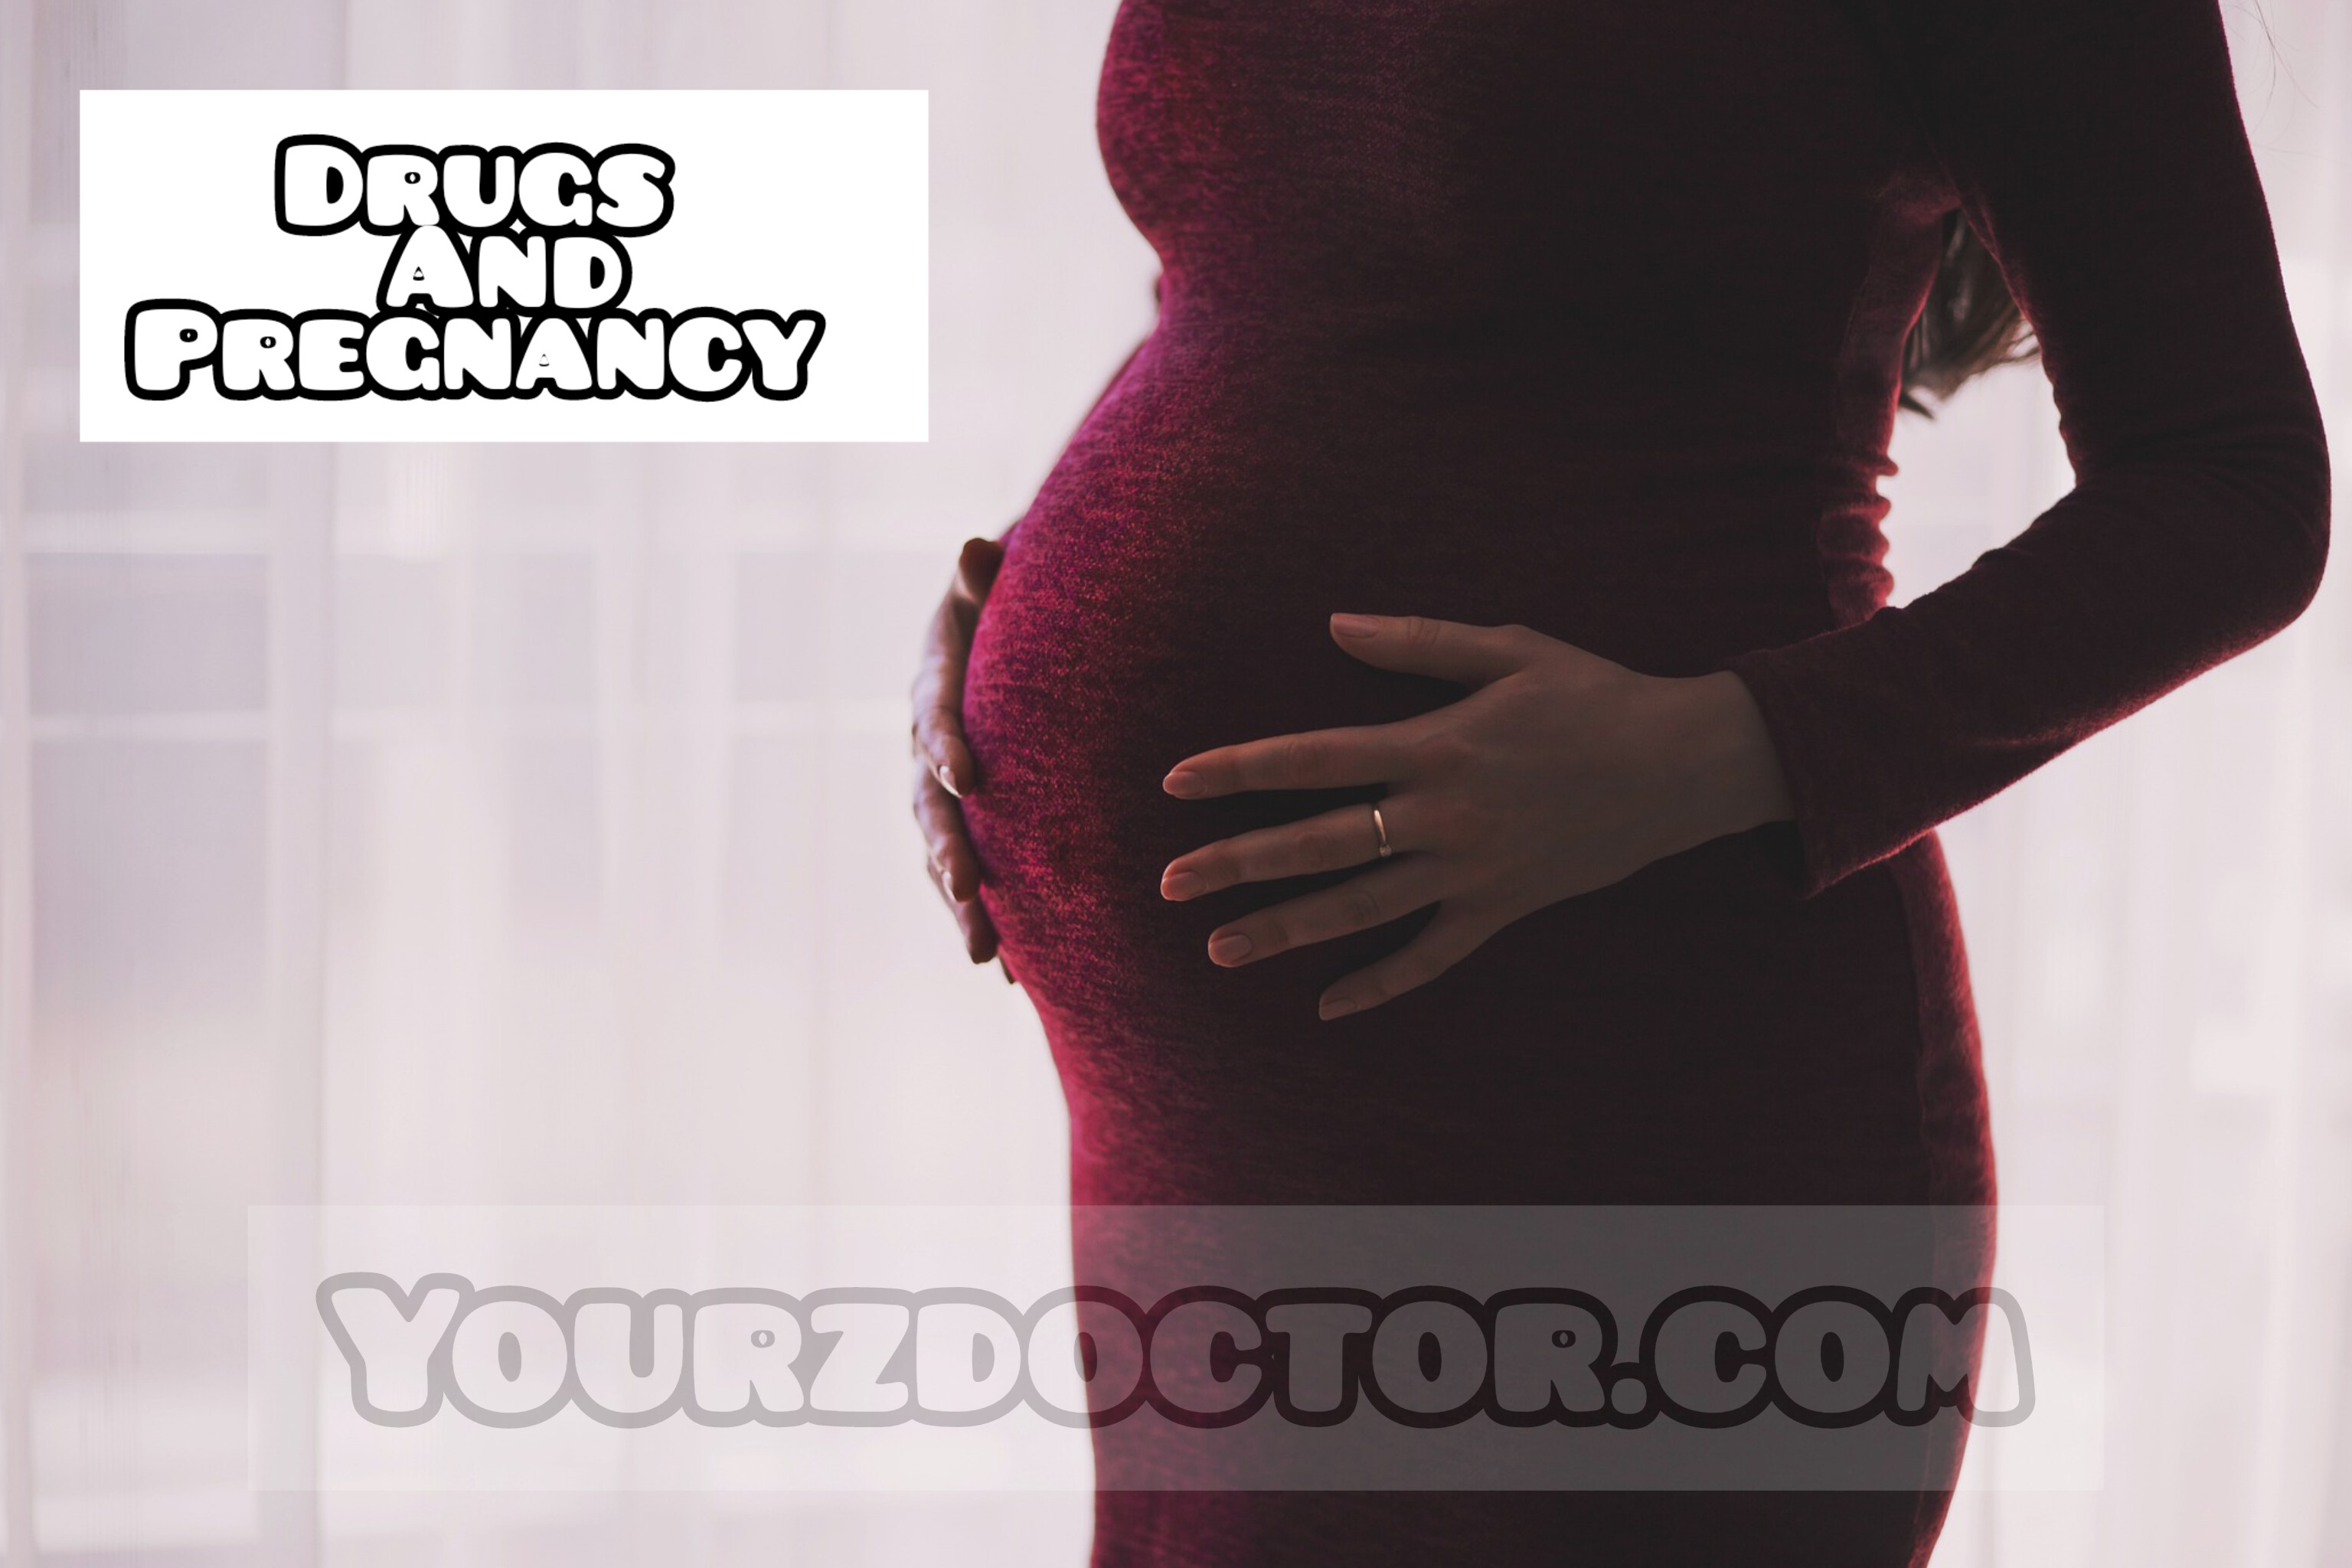 Drugs and pregnancy